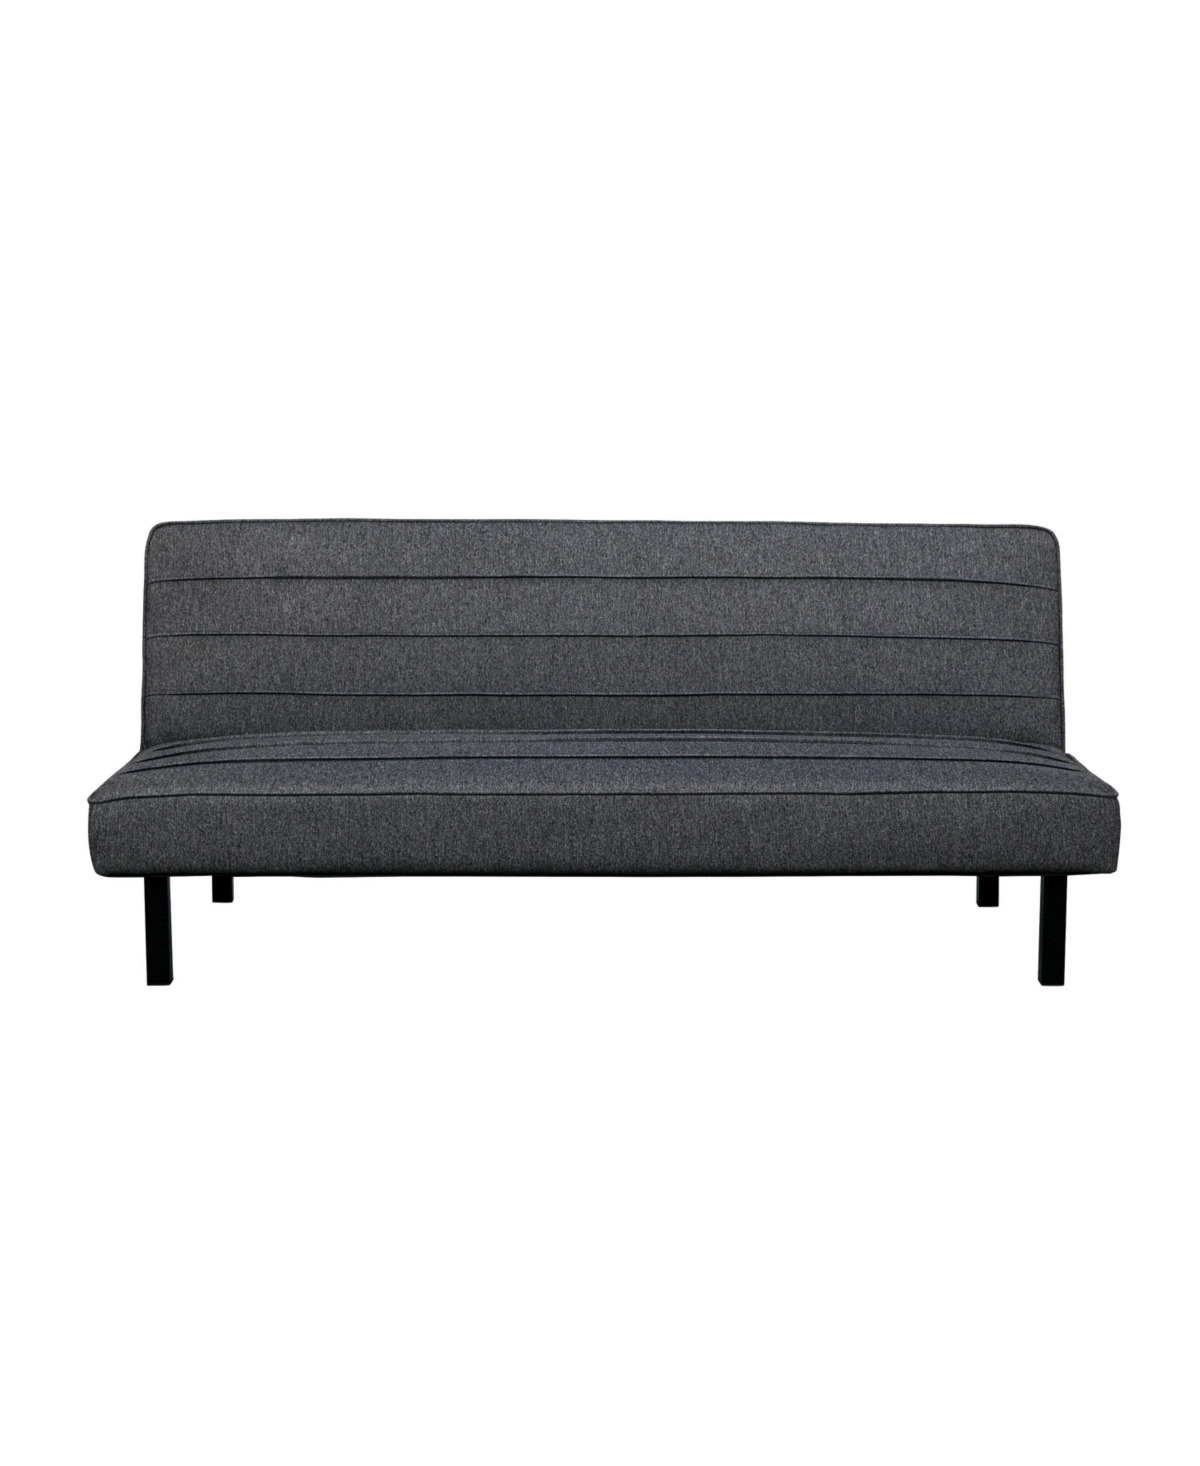 Serta 66.1" Polyester Campbell Convertible Futon In Charcoal